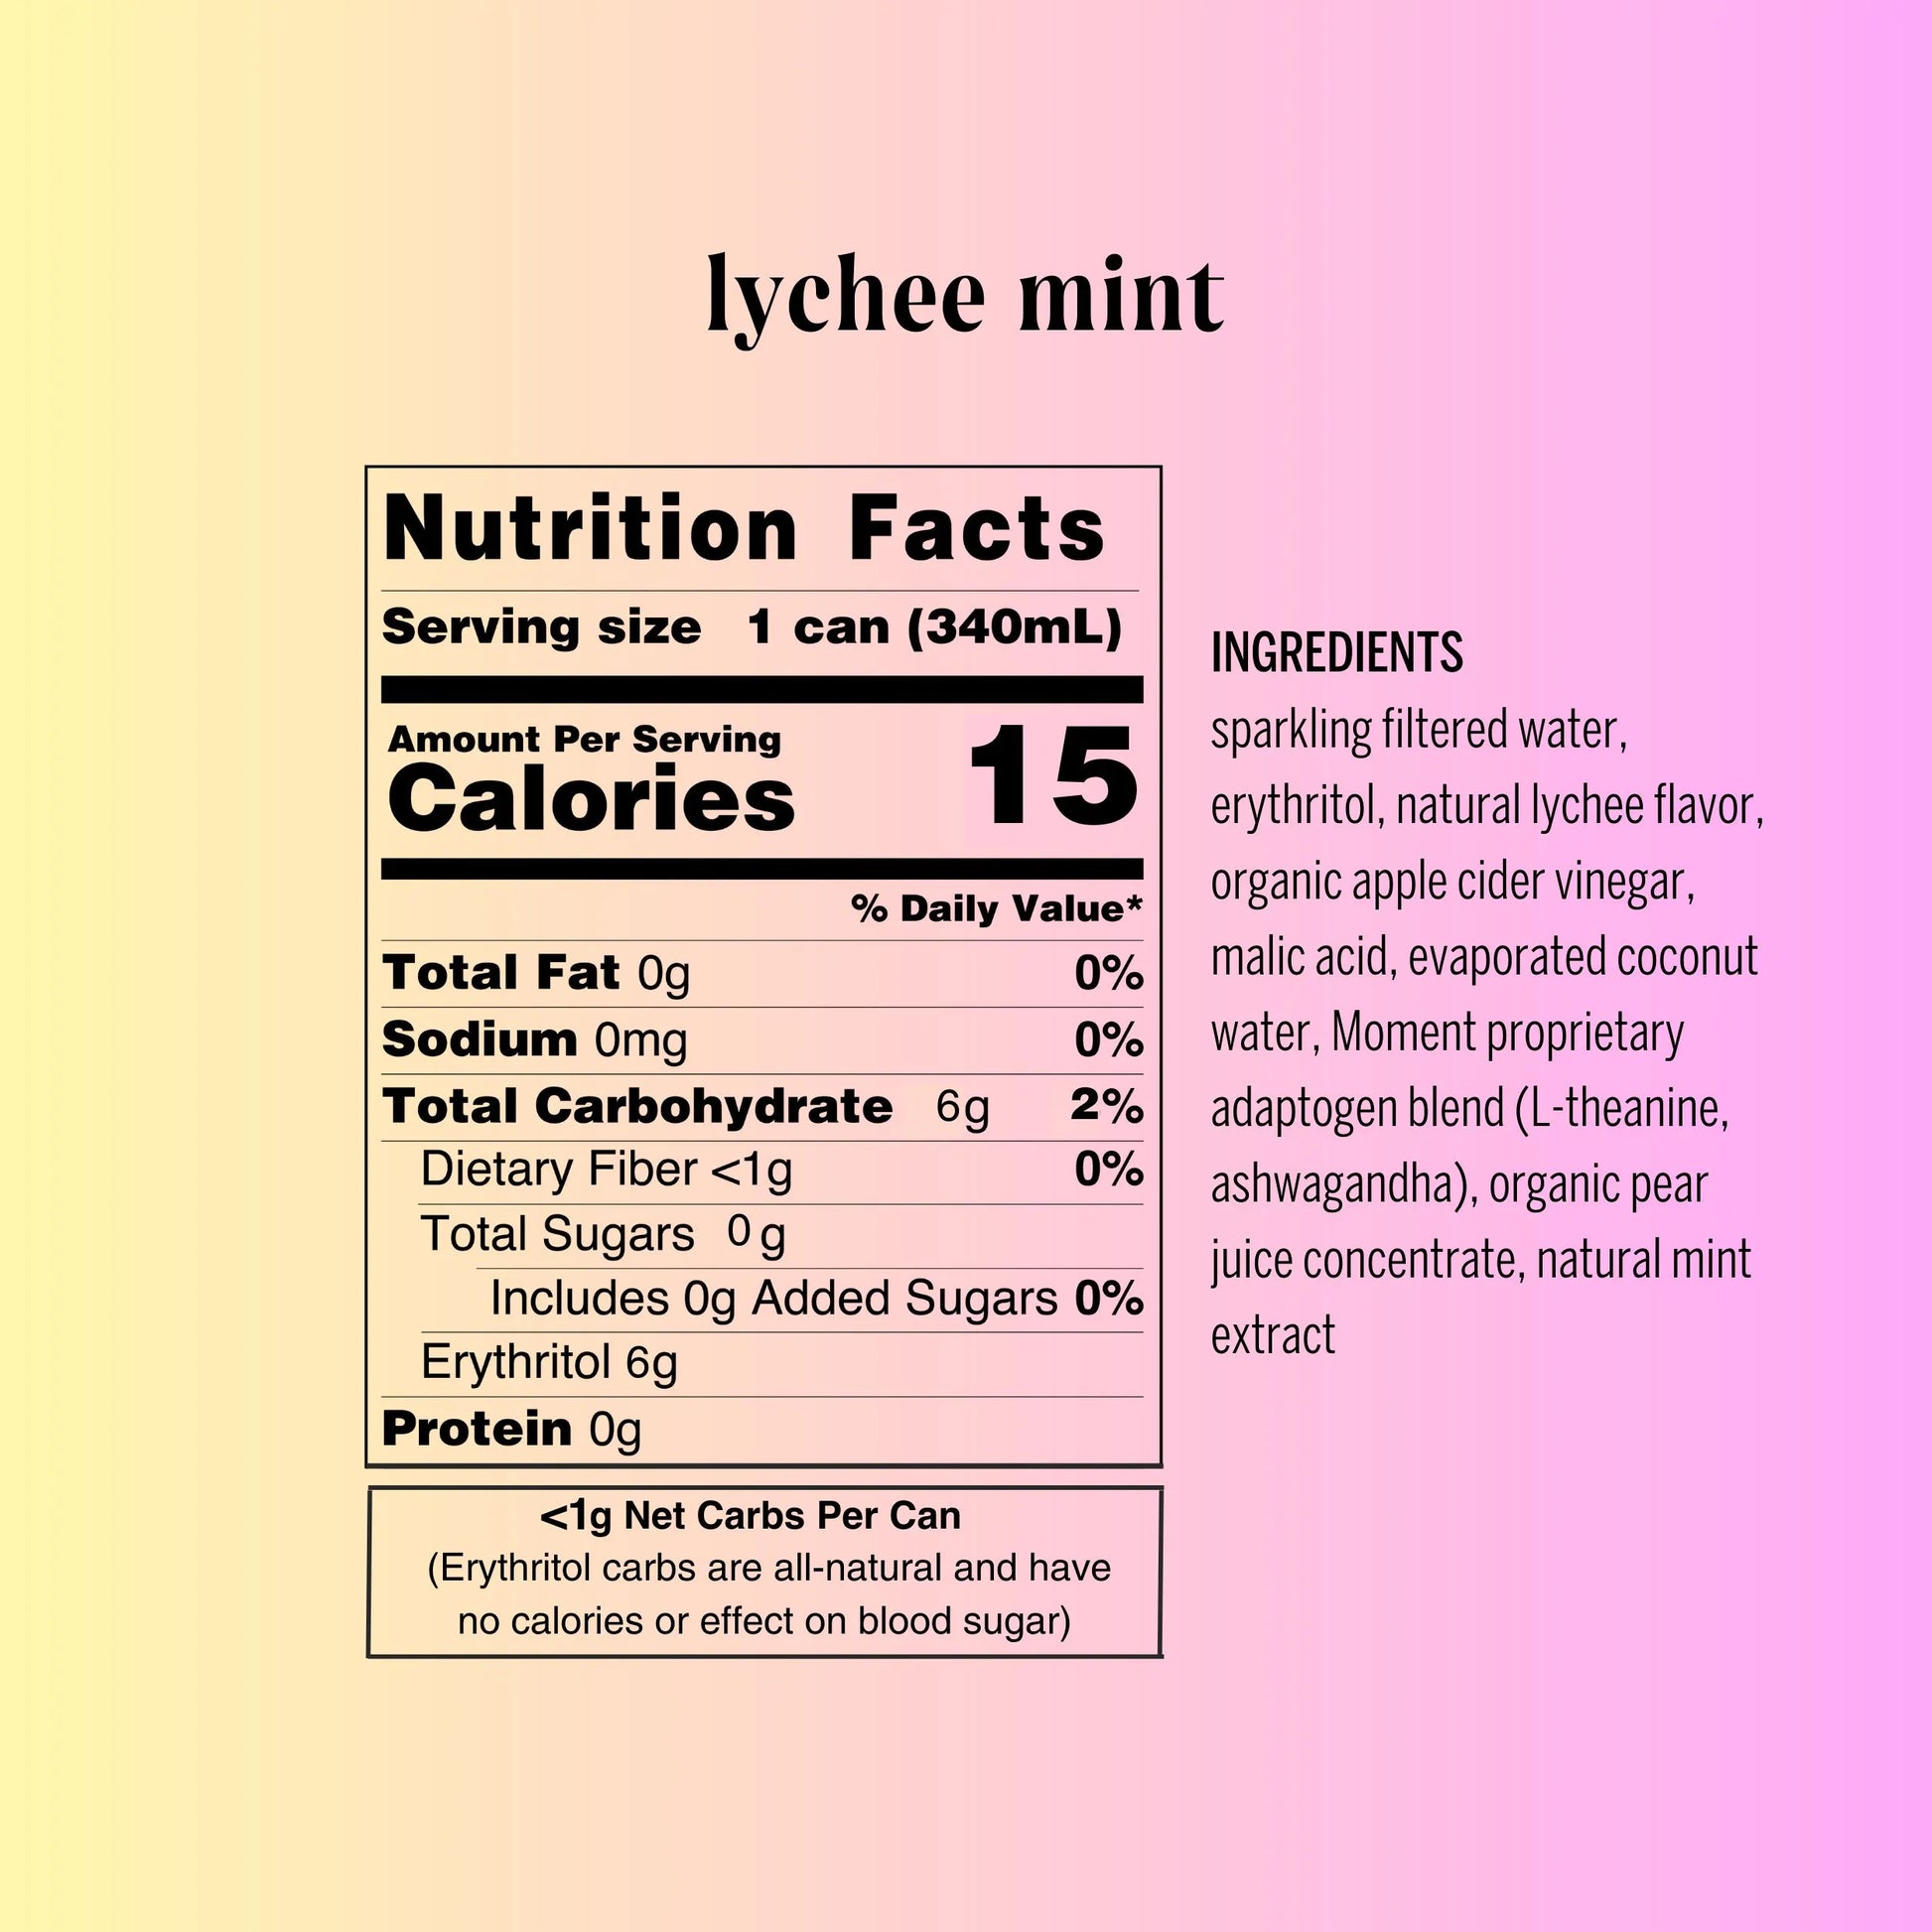 nutrition facts from a lychee mint can